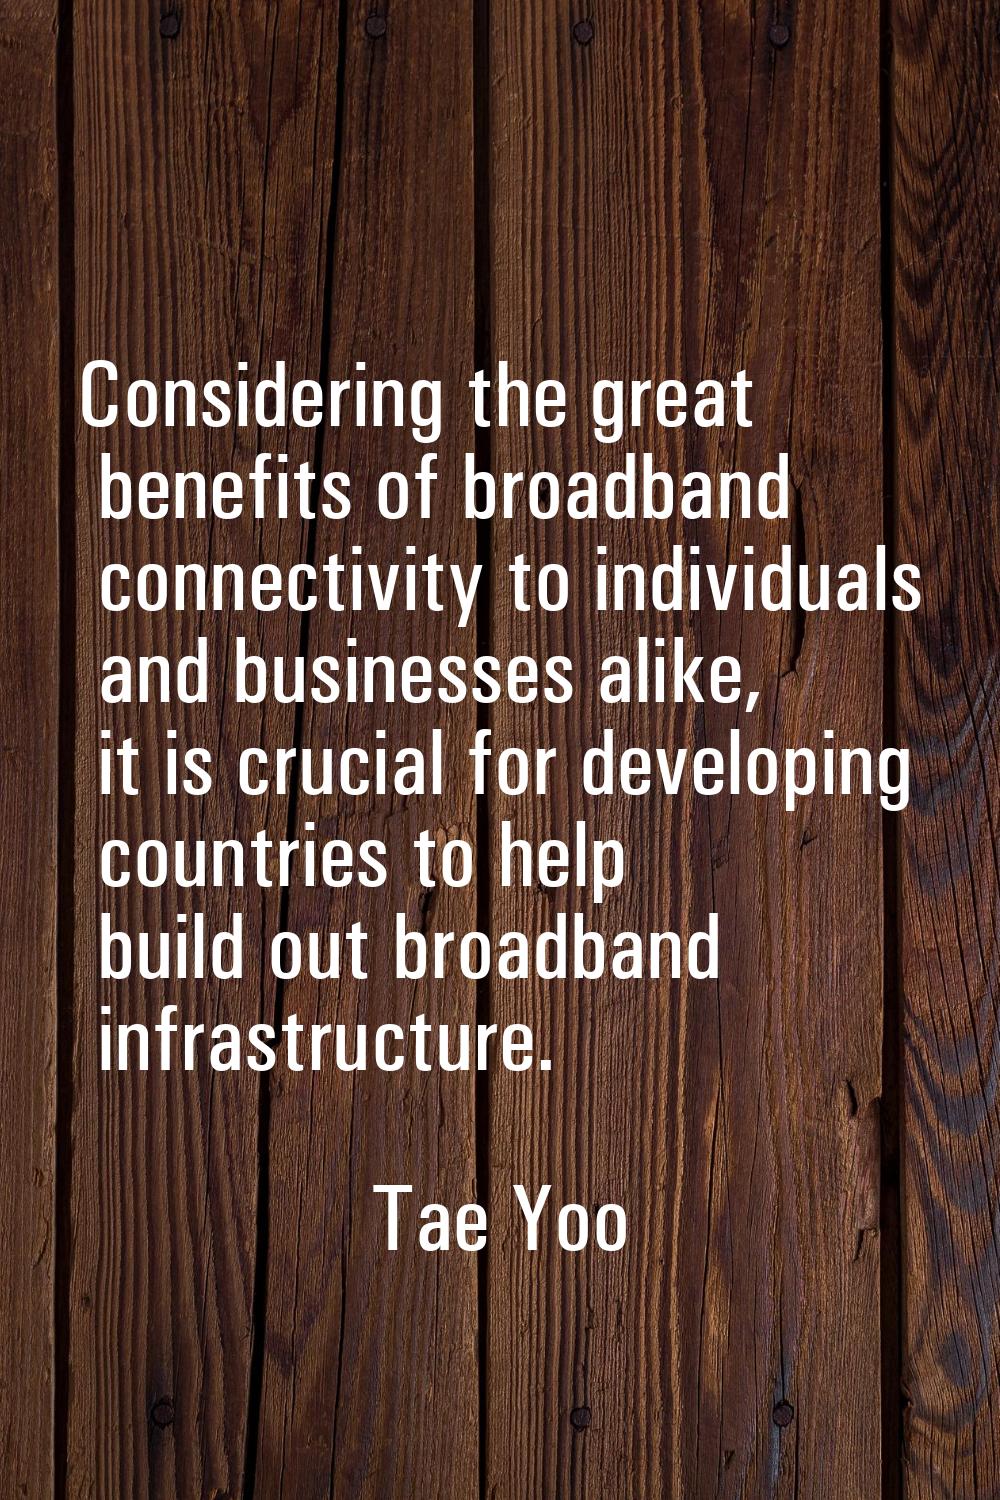 Considering the great benefits of broadband connectivity to individuals and businesses alike, it is